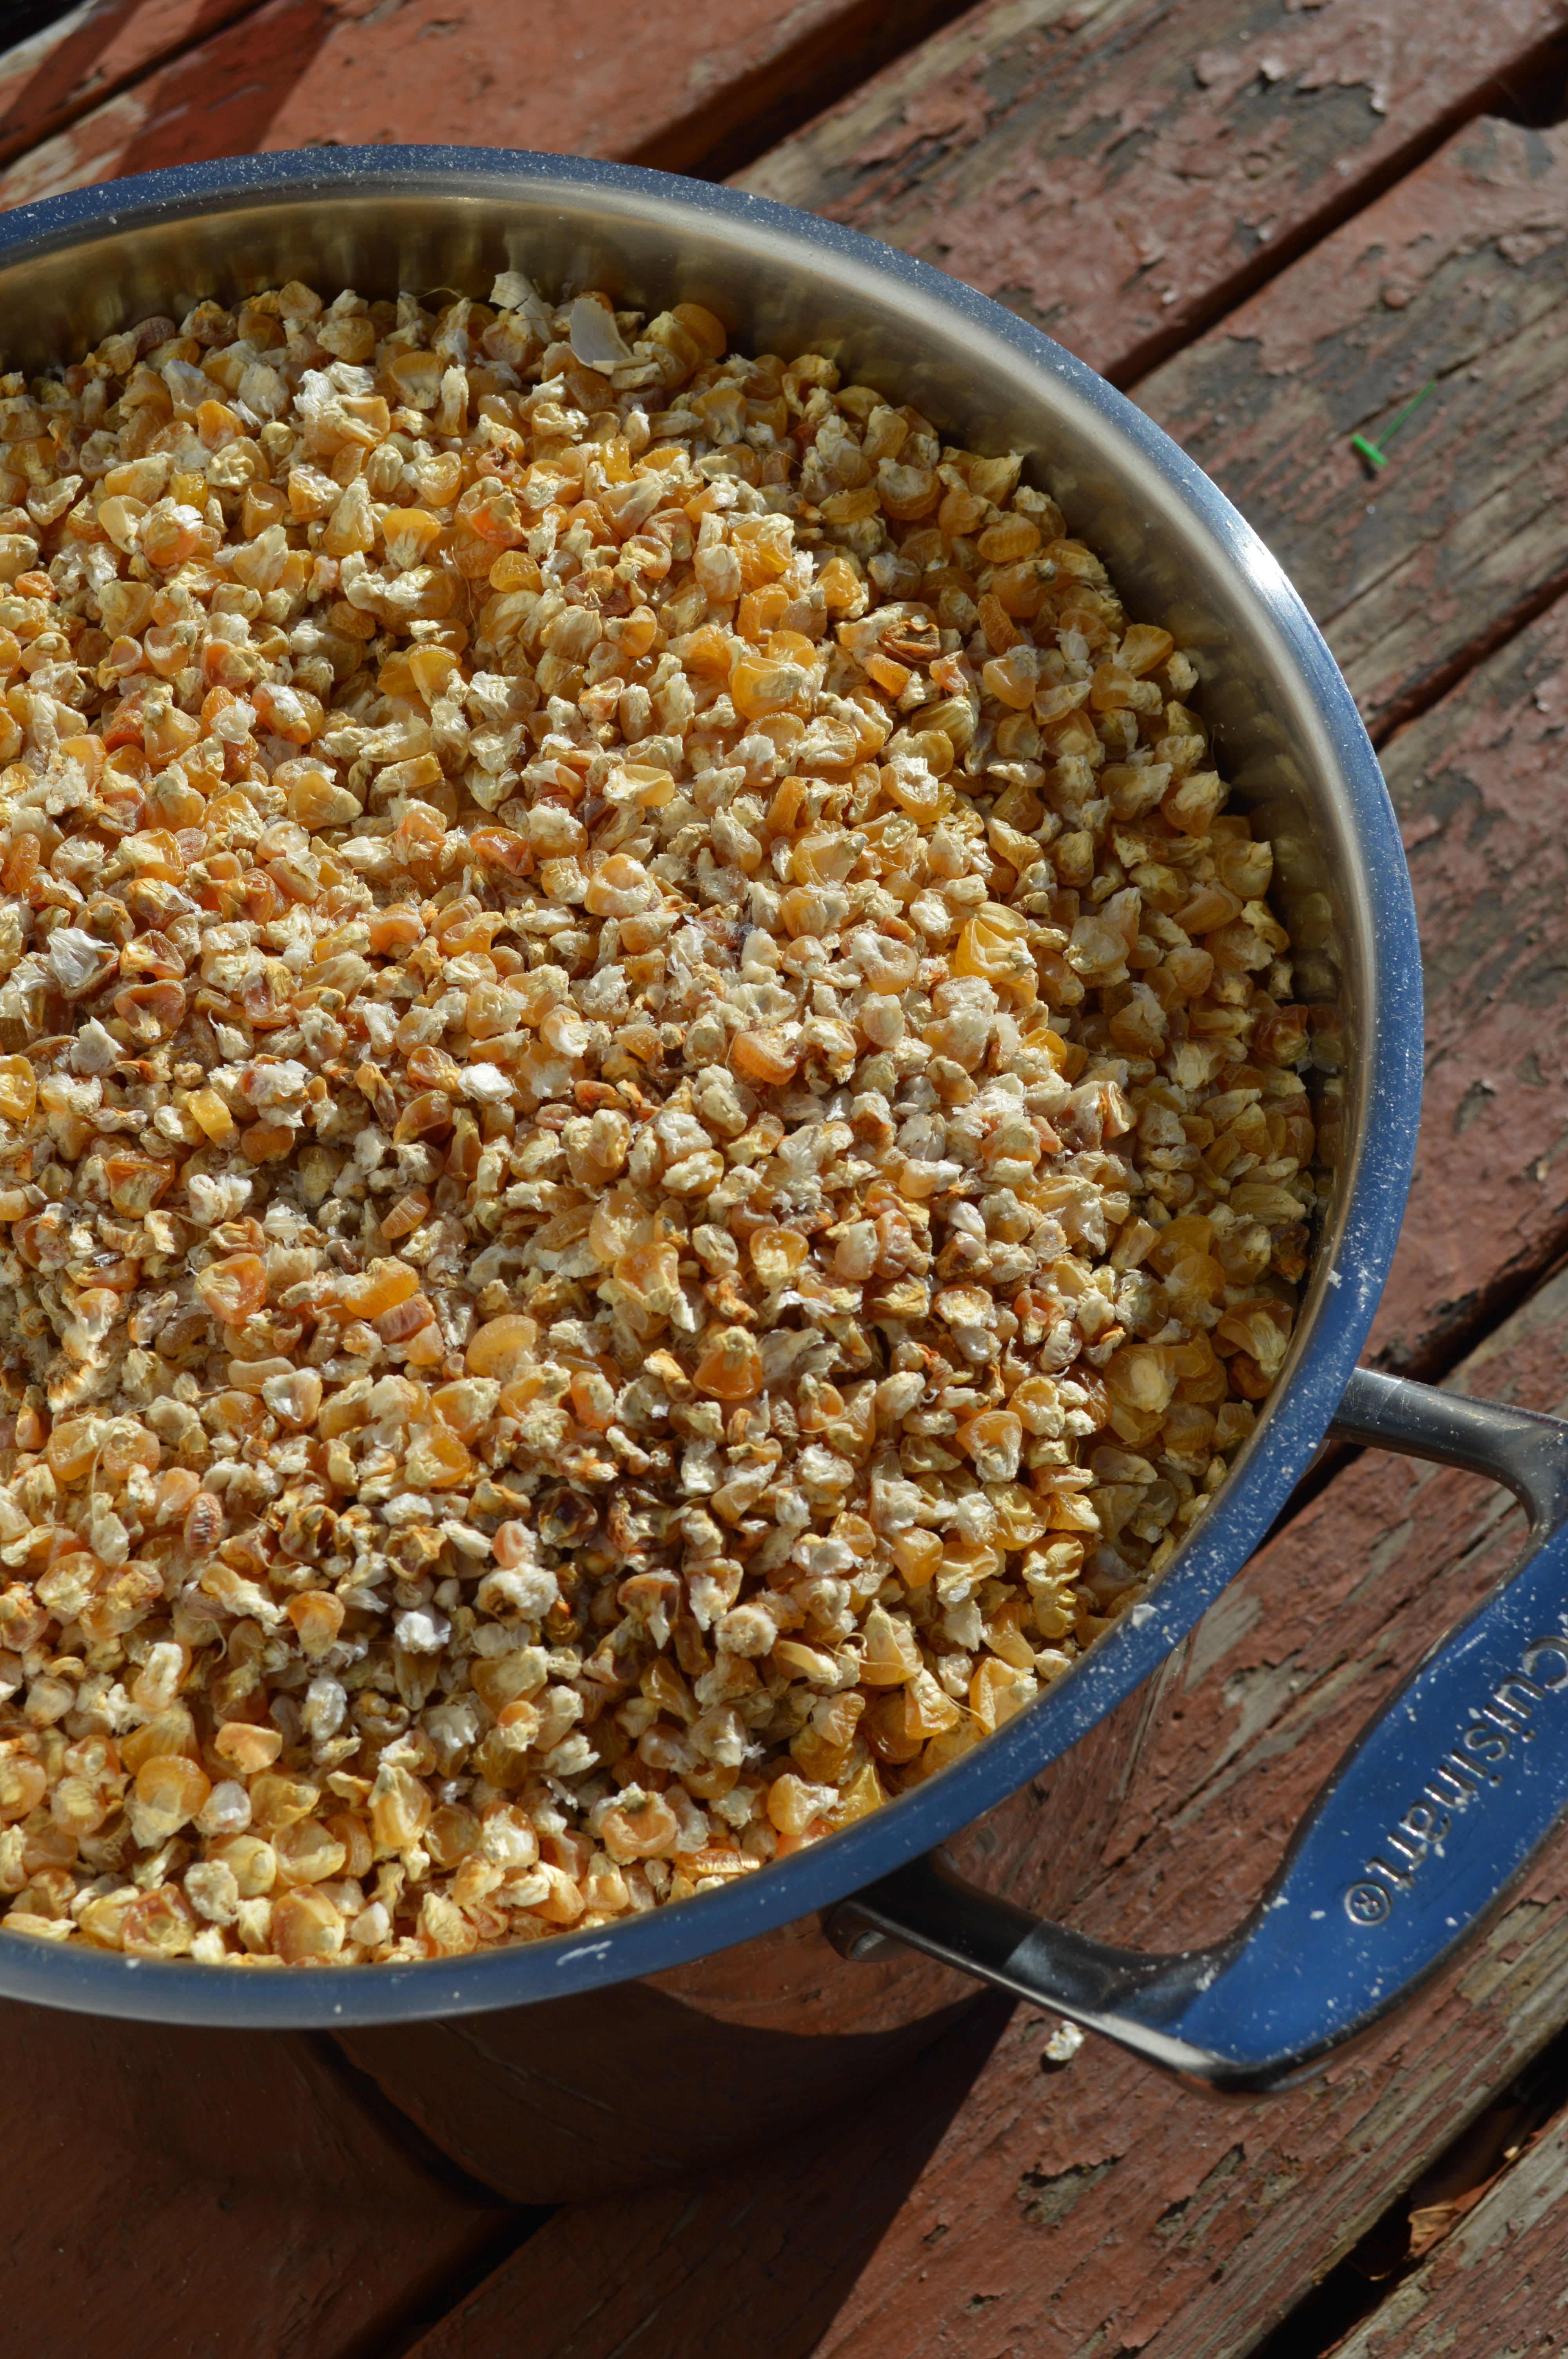 Dried kernels of corn, ready to be ground into cornmeal